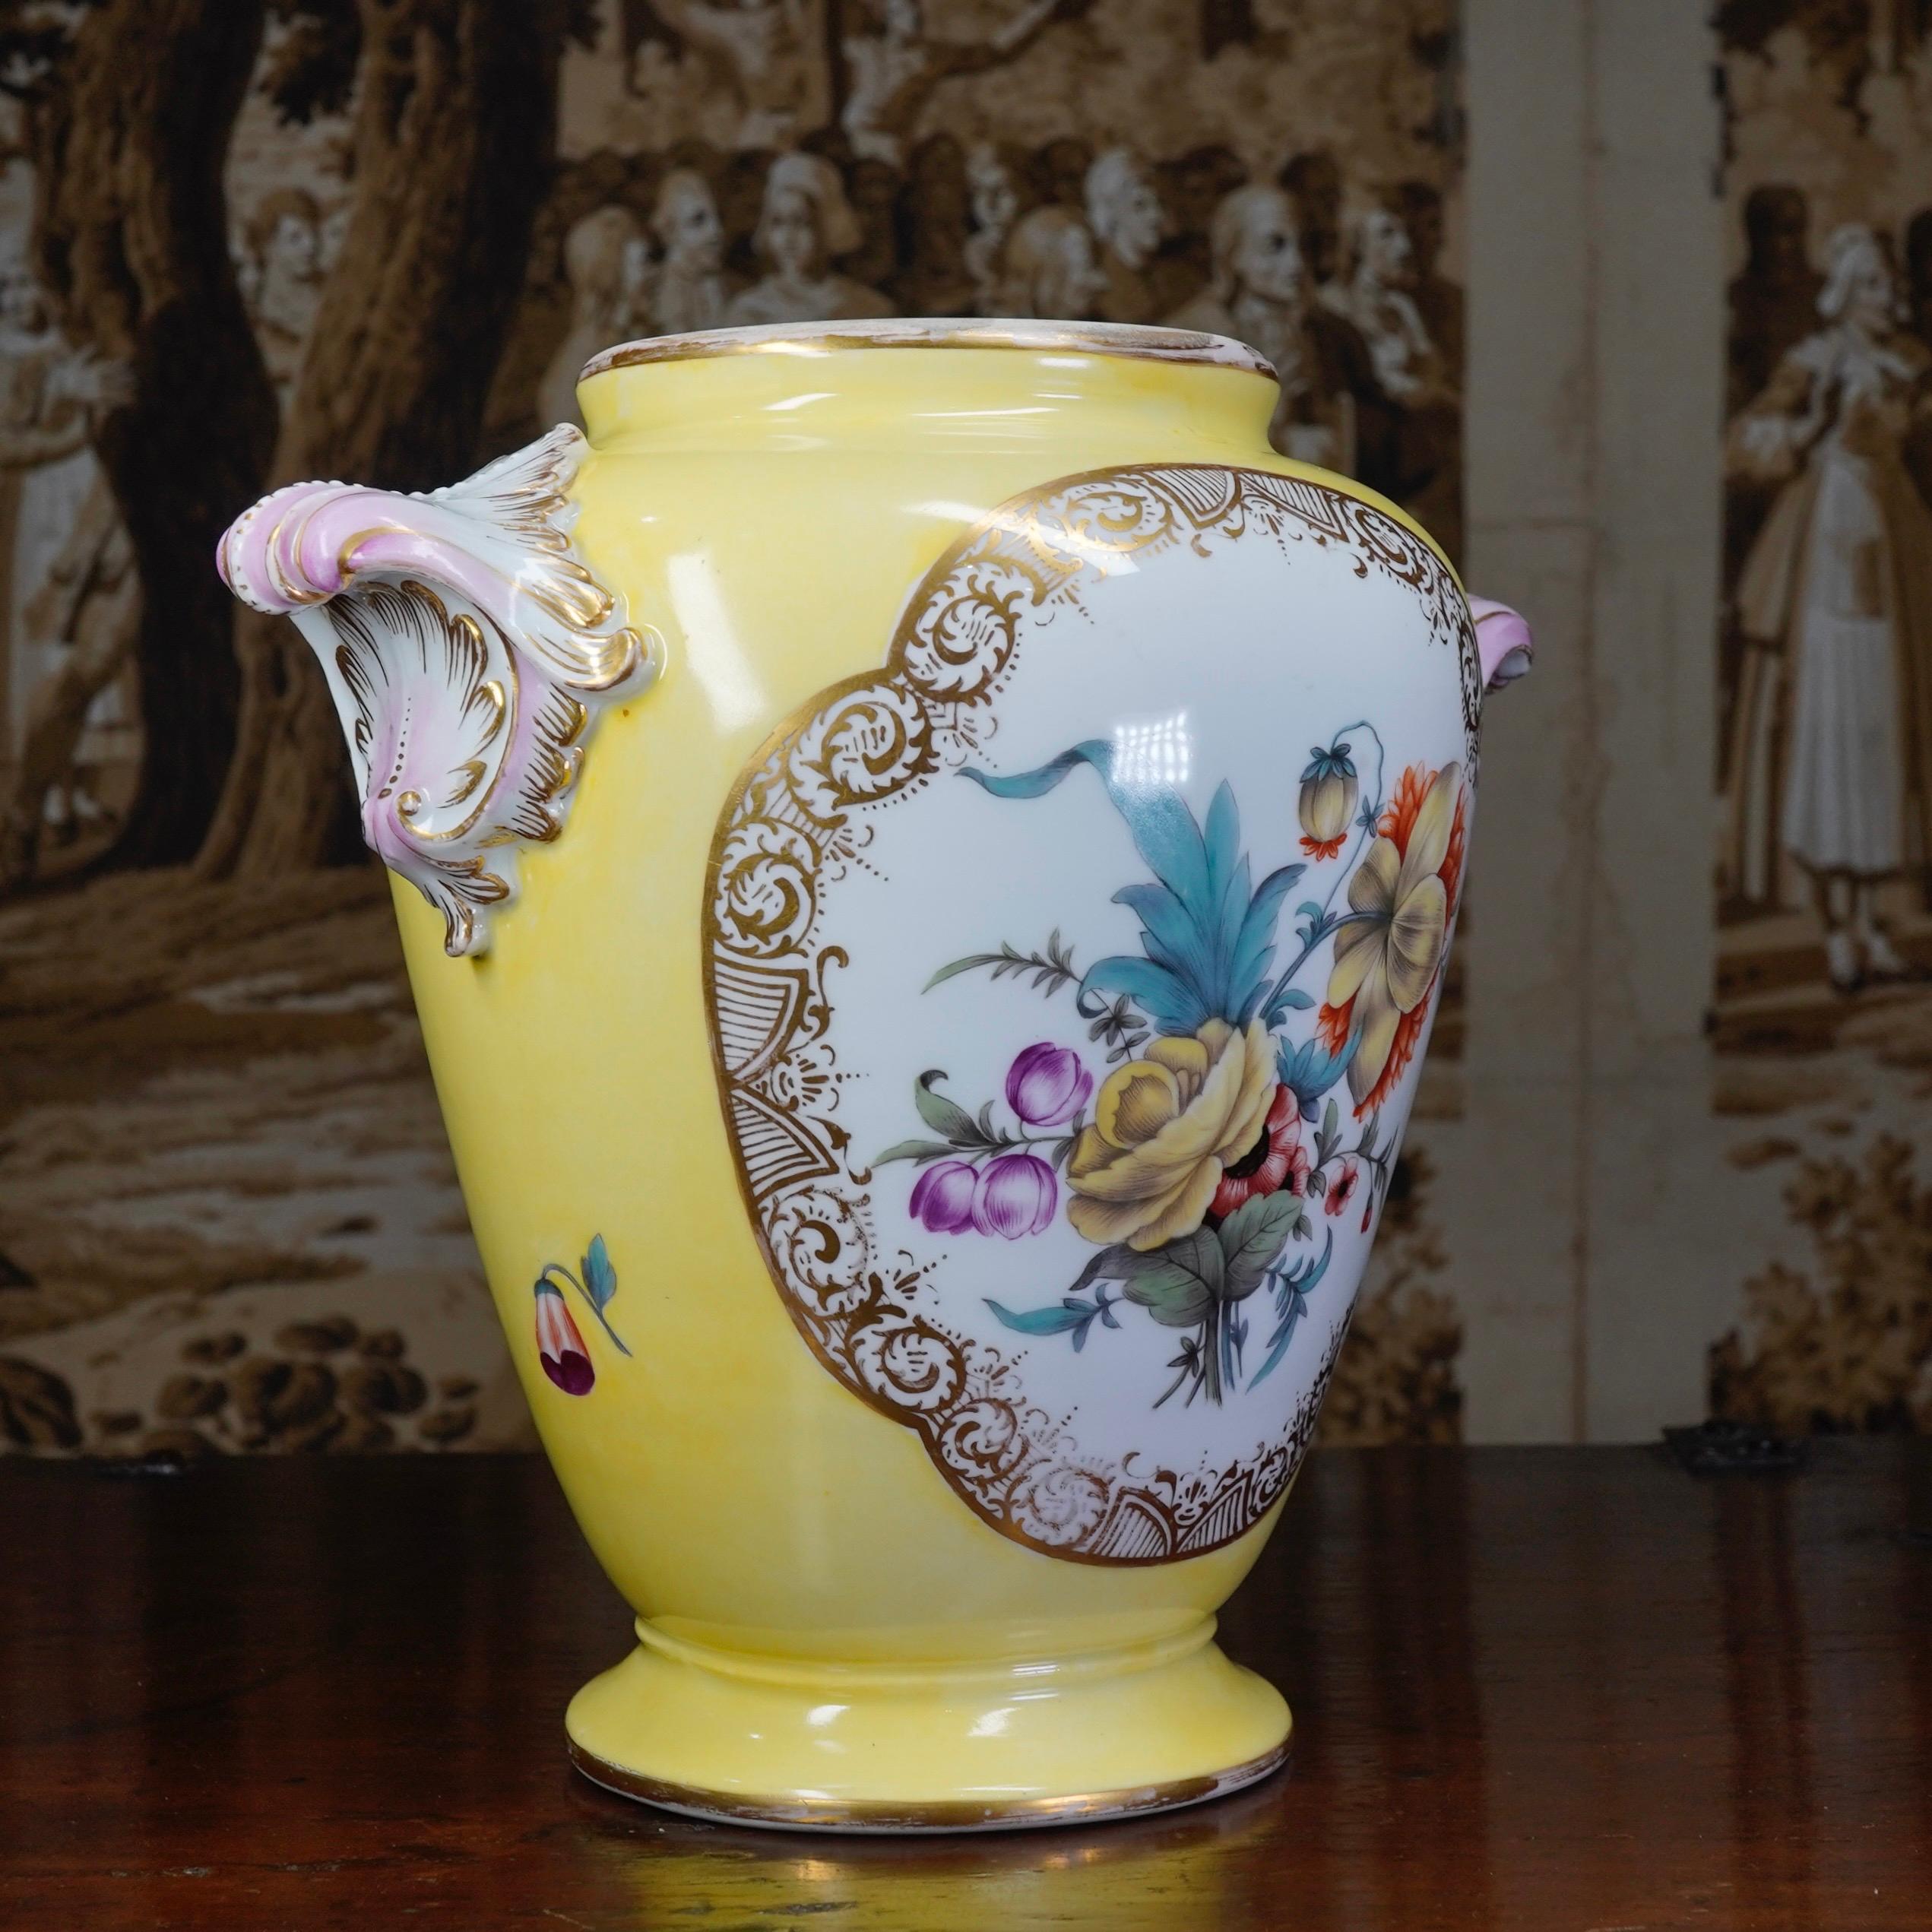 Fine quality Furstenberg footed vase, well painted with a courting couple in a garden to the front, the reverse with a large flower spray, reserved in elaborate gilt frames on a pale yellow ground, with two elaborate shell form handles picked out in